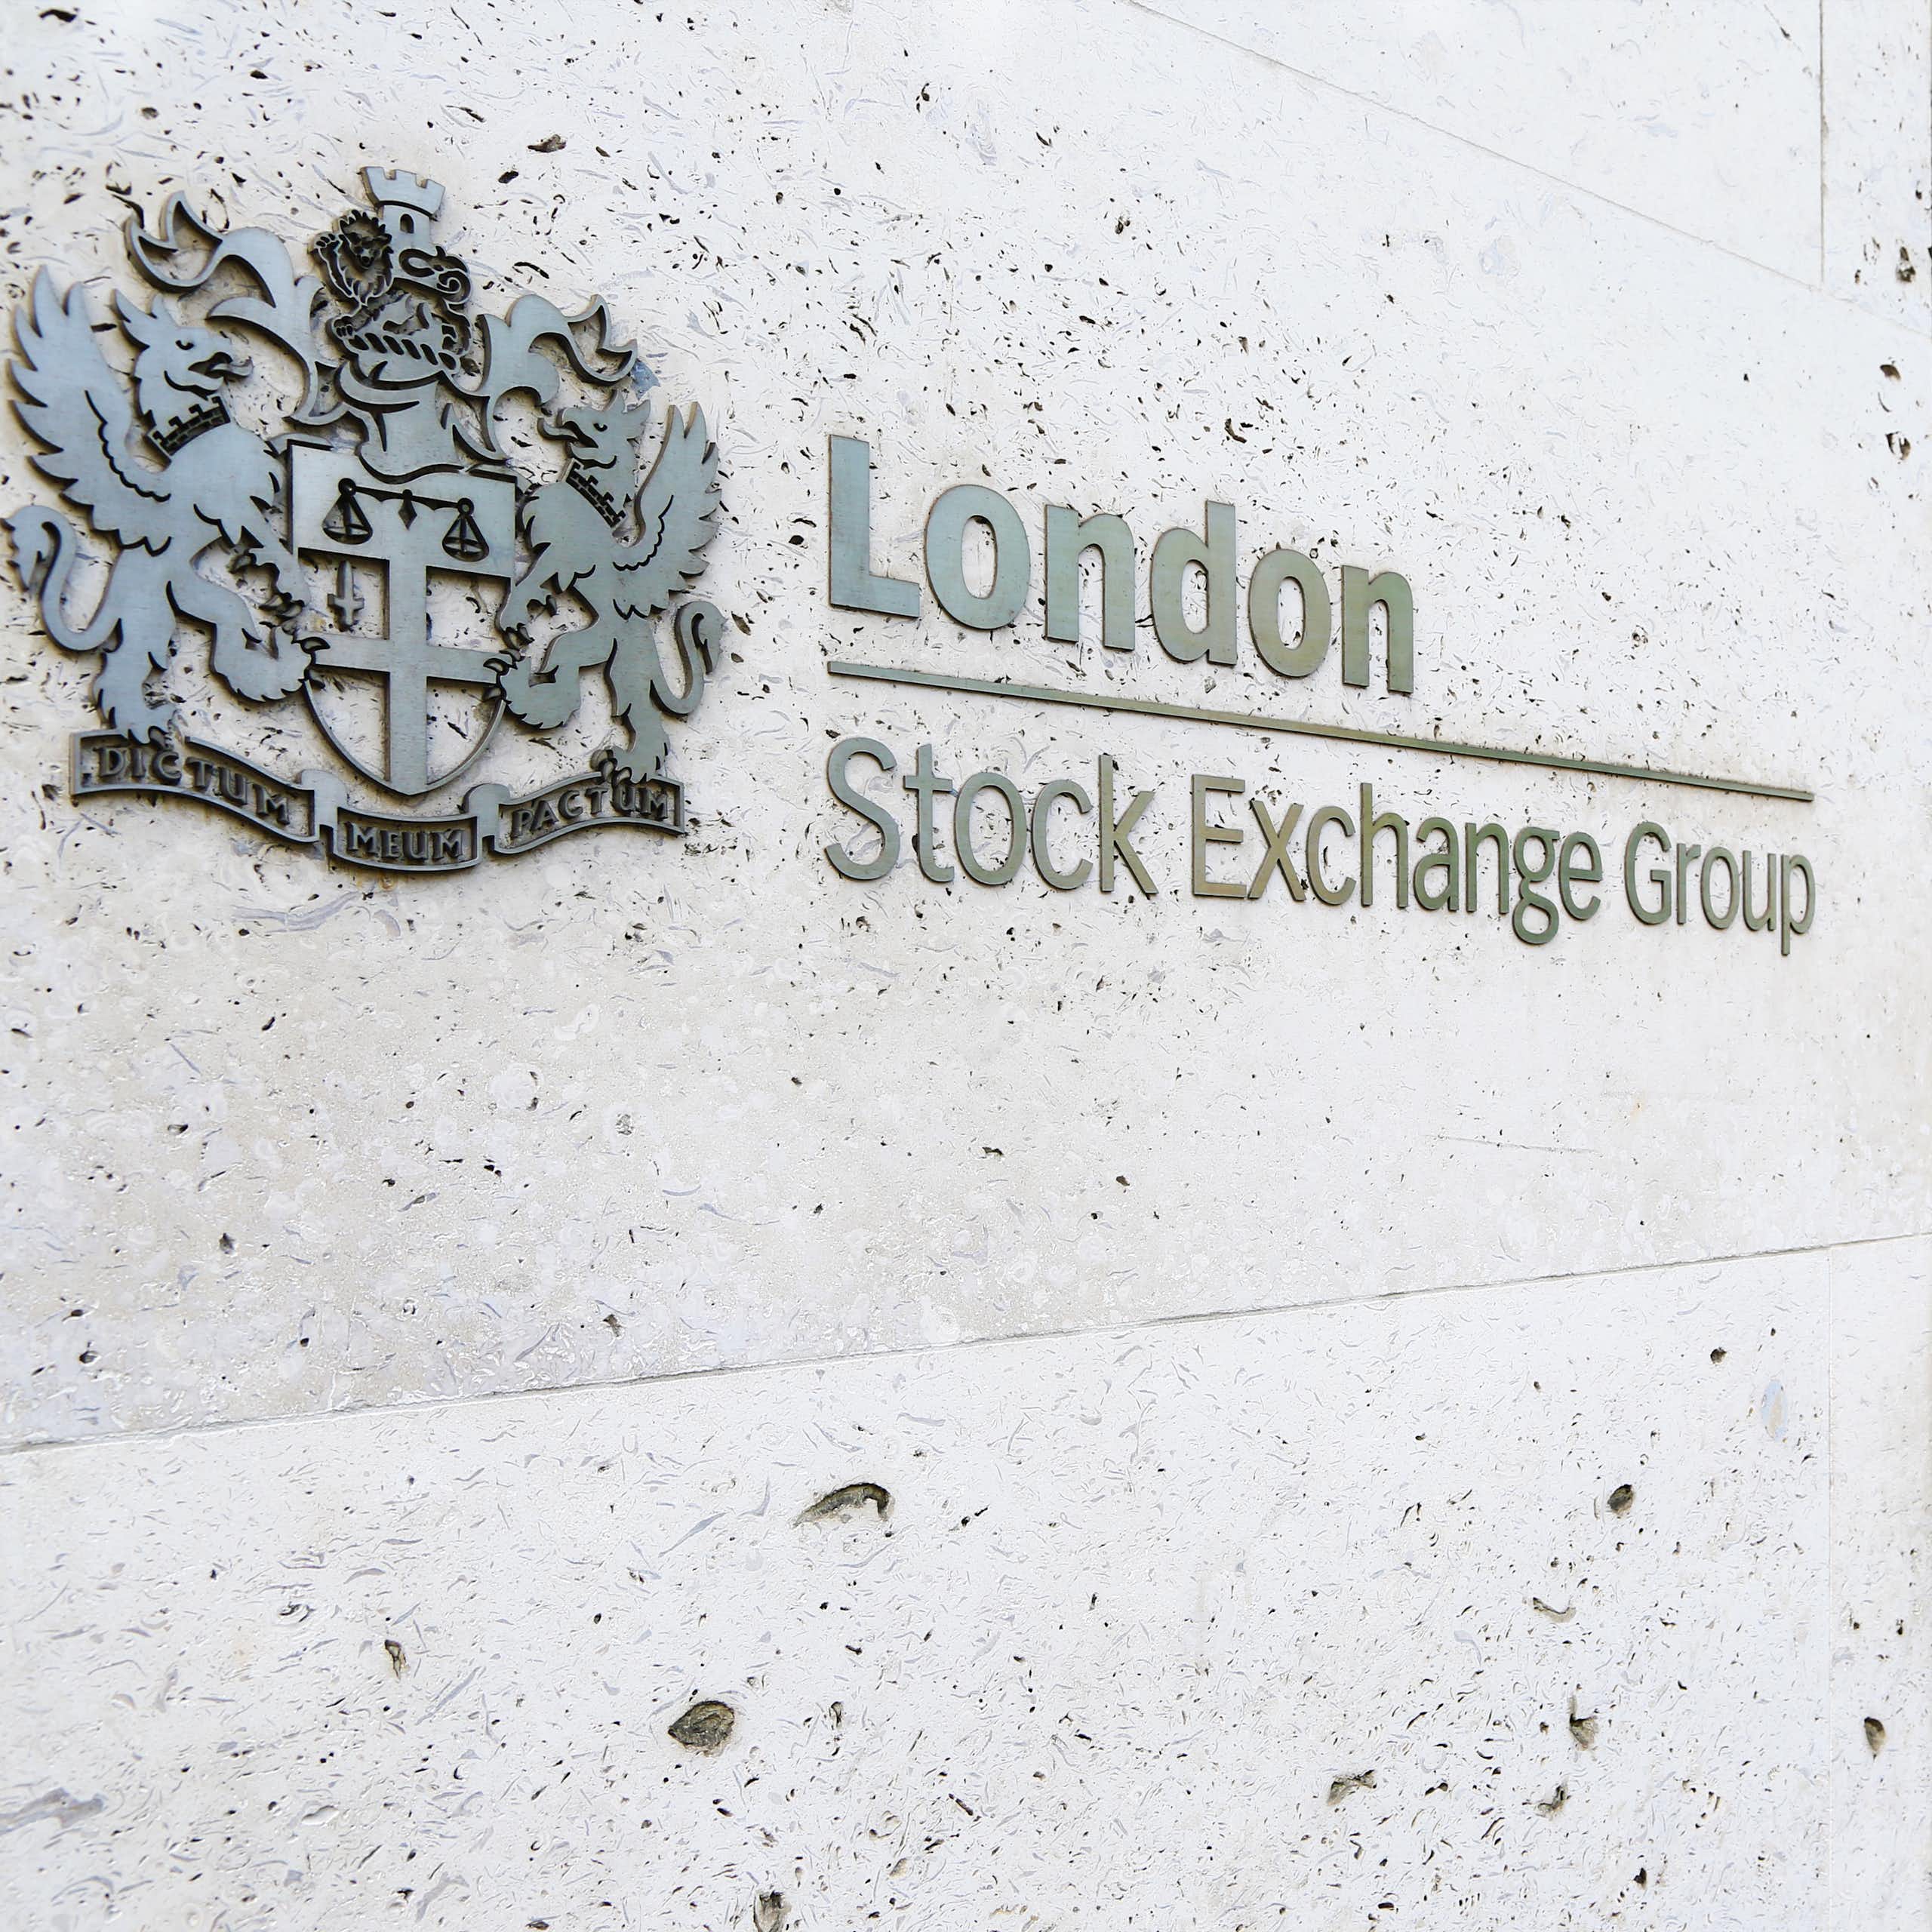 Entrance to the London Stock Exchange